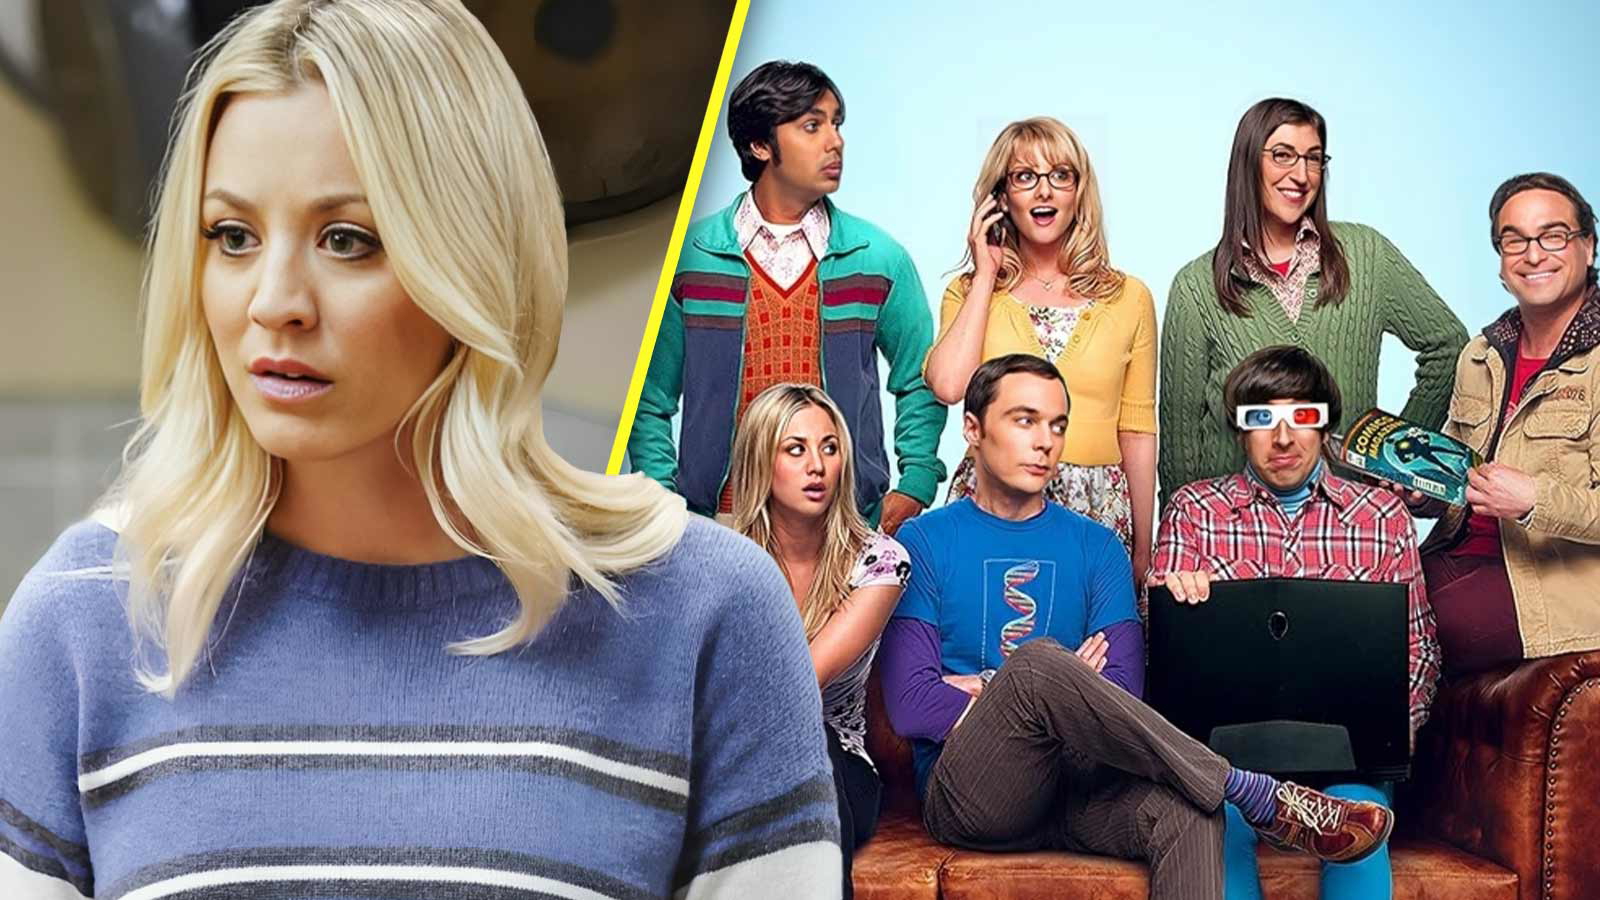 “I was like crying and hysterical”: Kaley Cuoco Was an Emotional Mess Months Before ‘The Big Bang Theory’ Ended Until Her Survival Instinct Kicked in